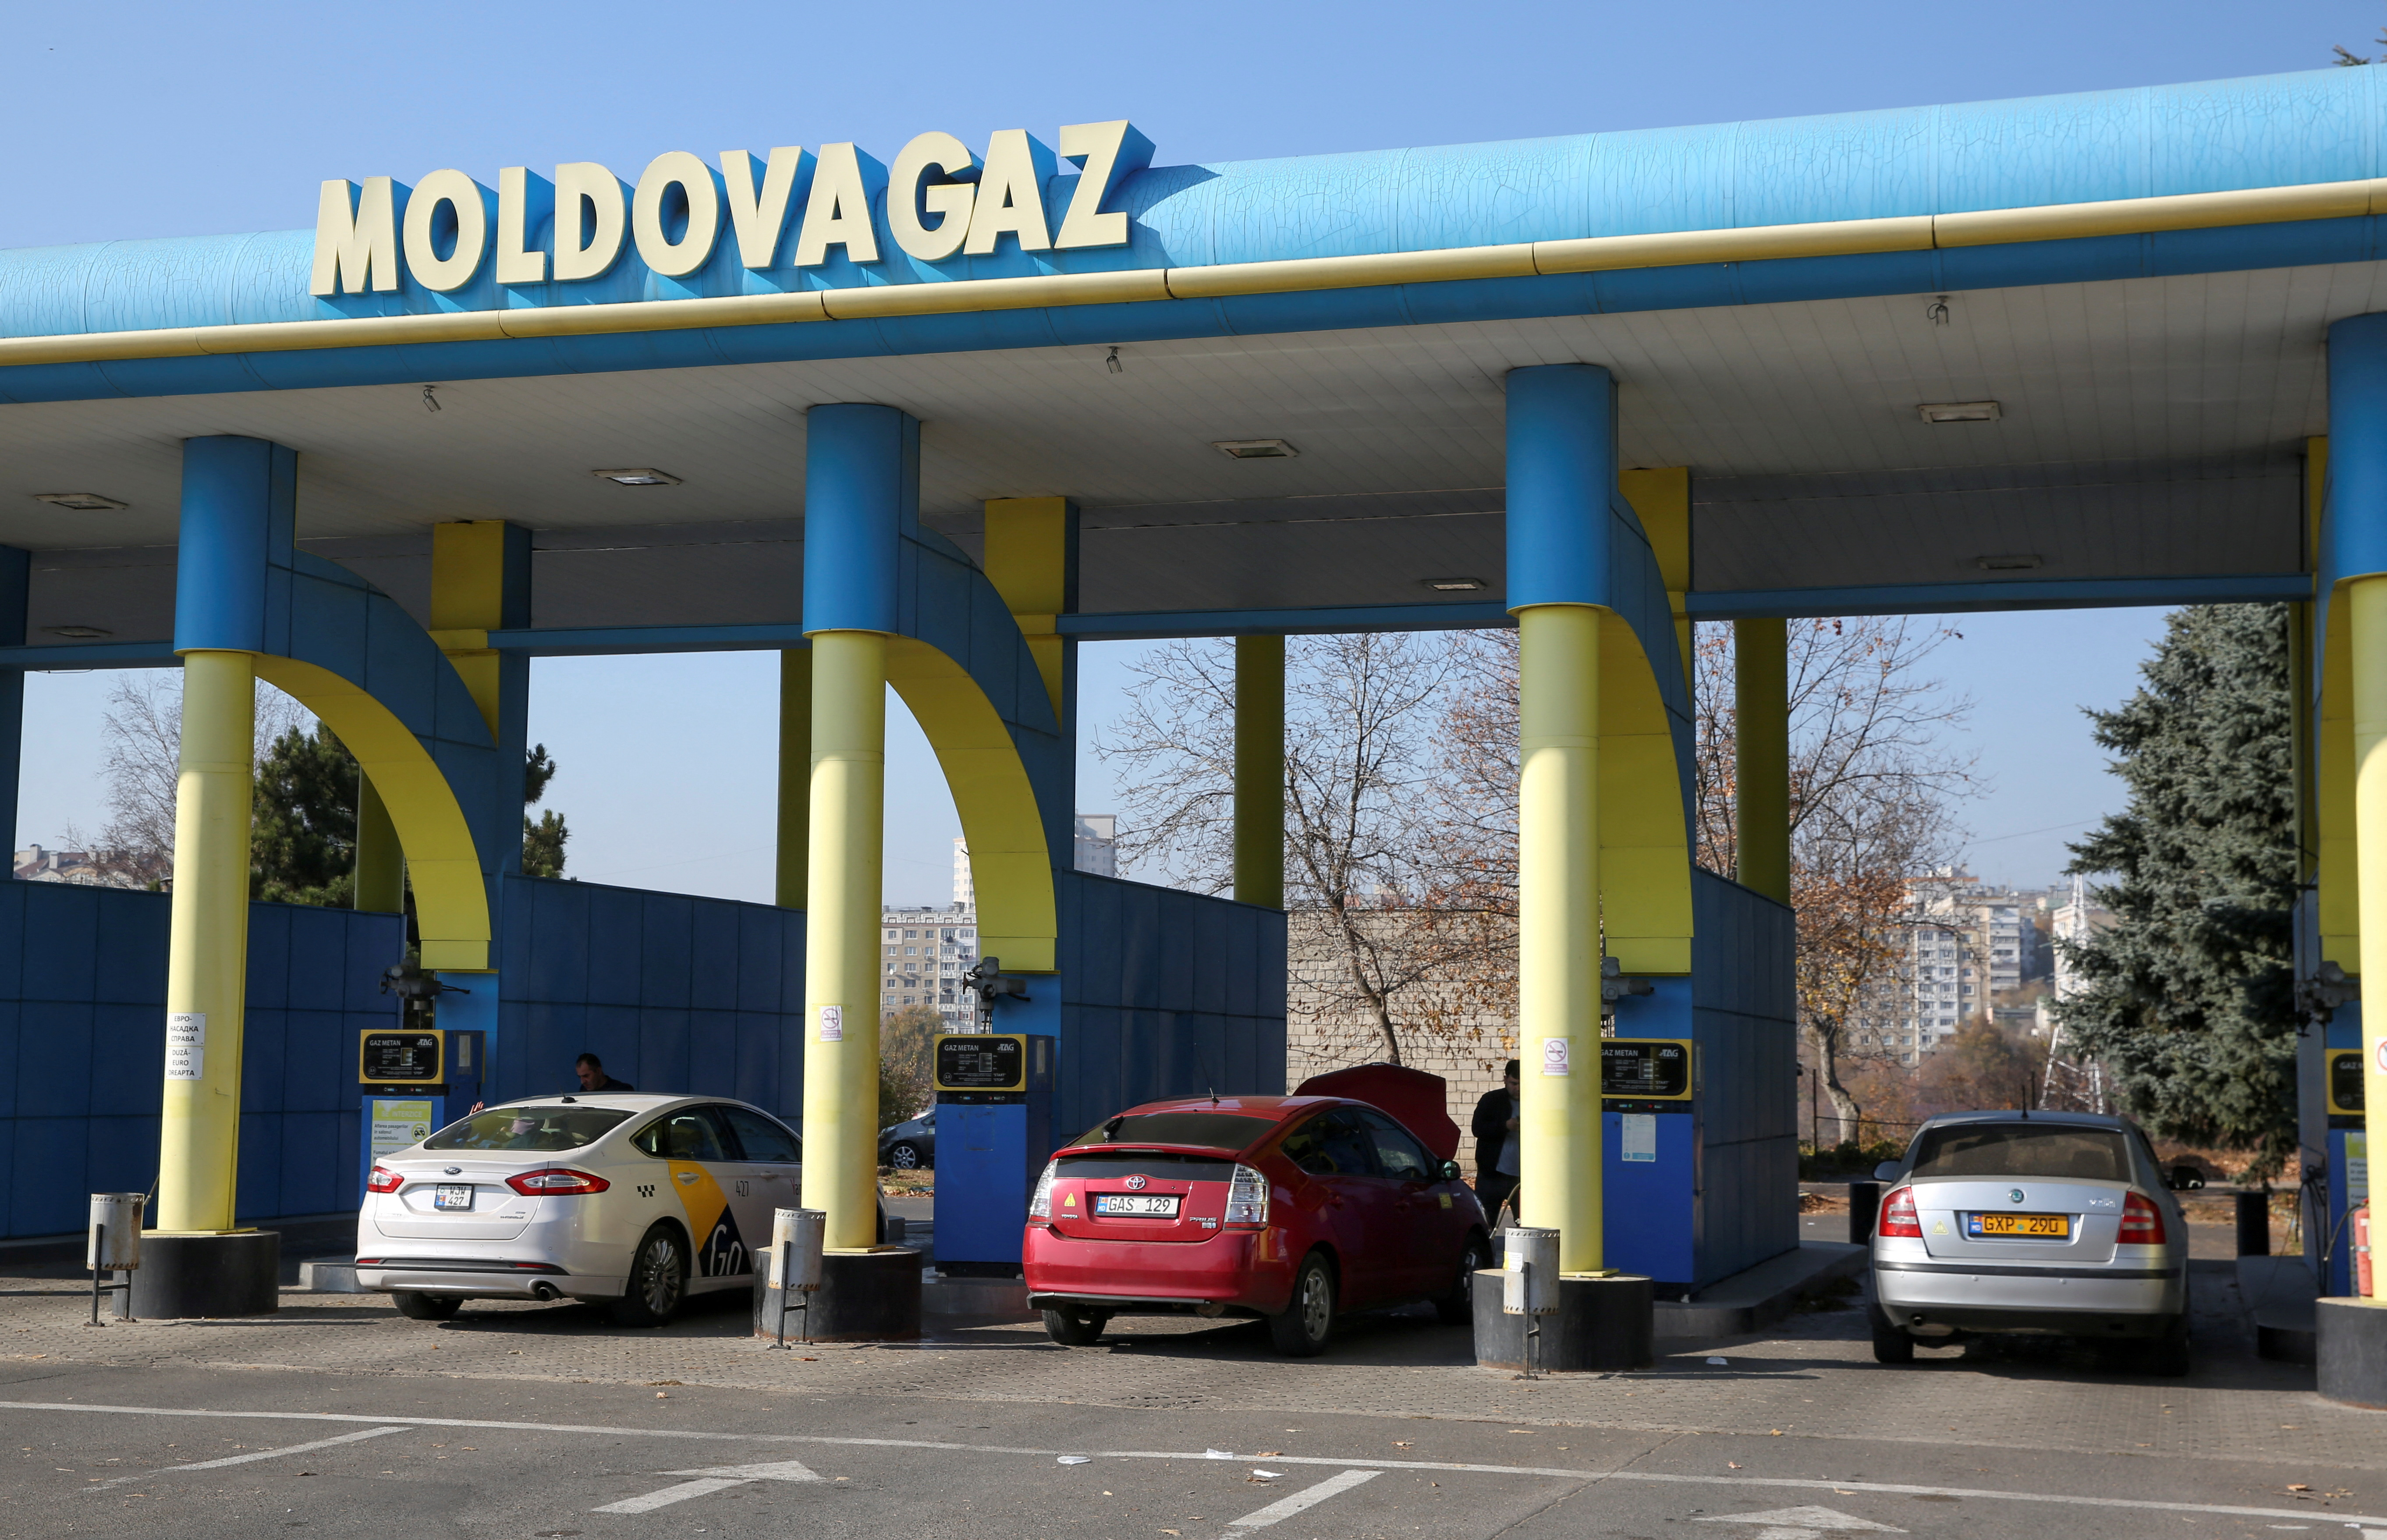 The logo of Moldovagaz energy company is on display in Chisinau